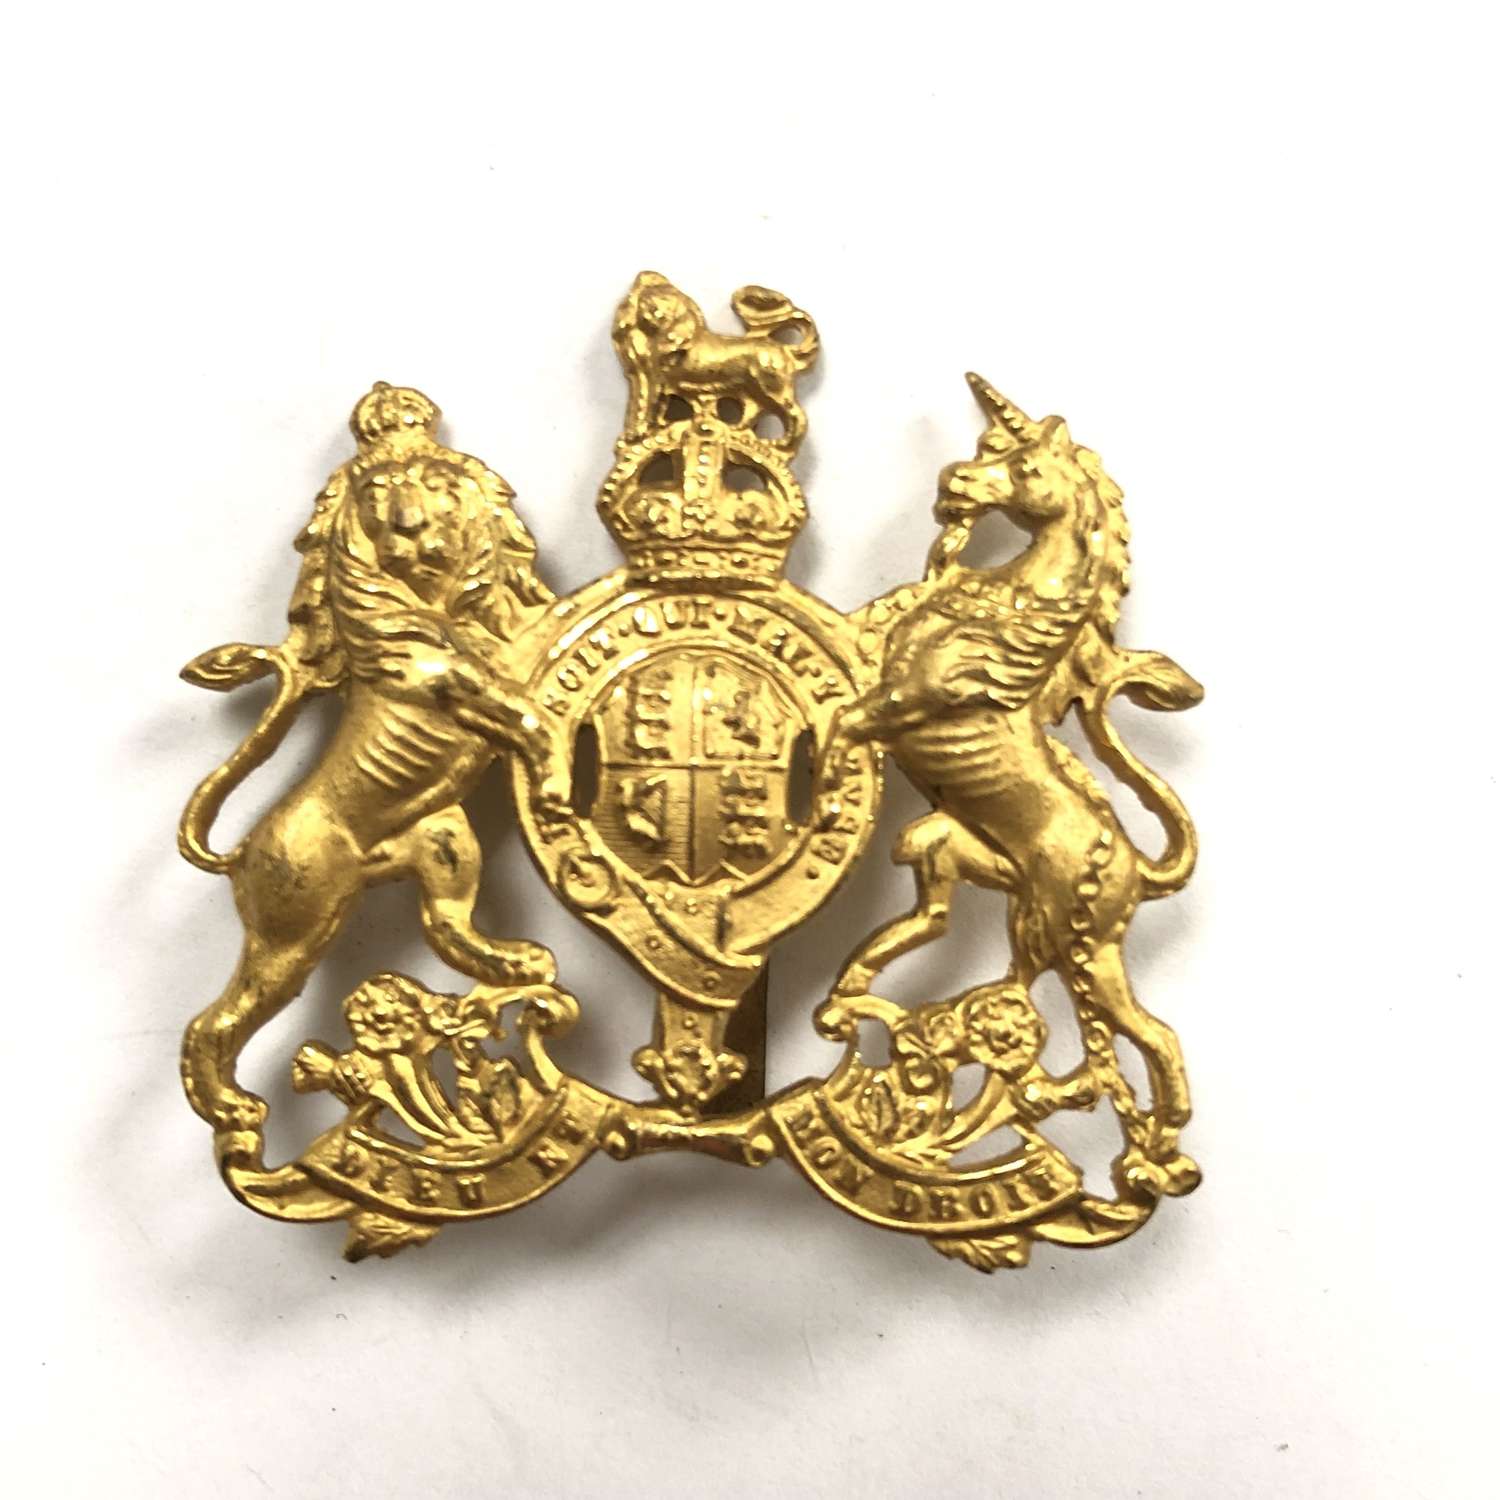 Colonial Service Officer's head-dress badge by J.R. Gaunt, London